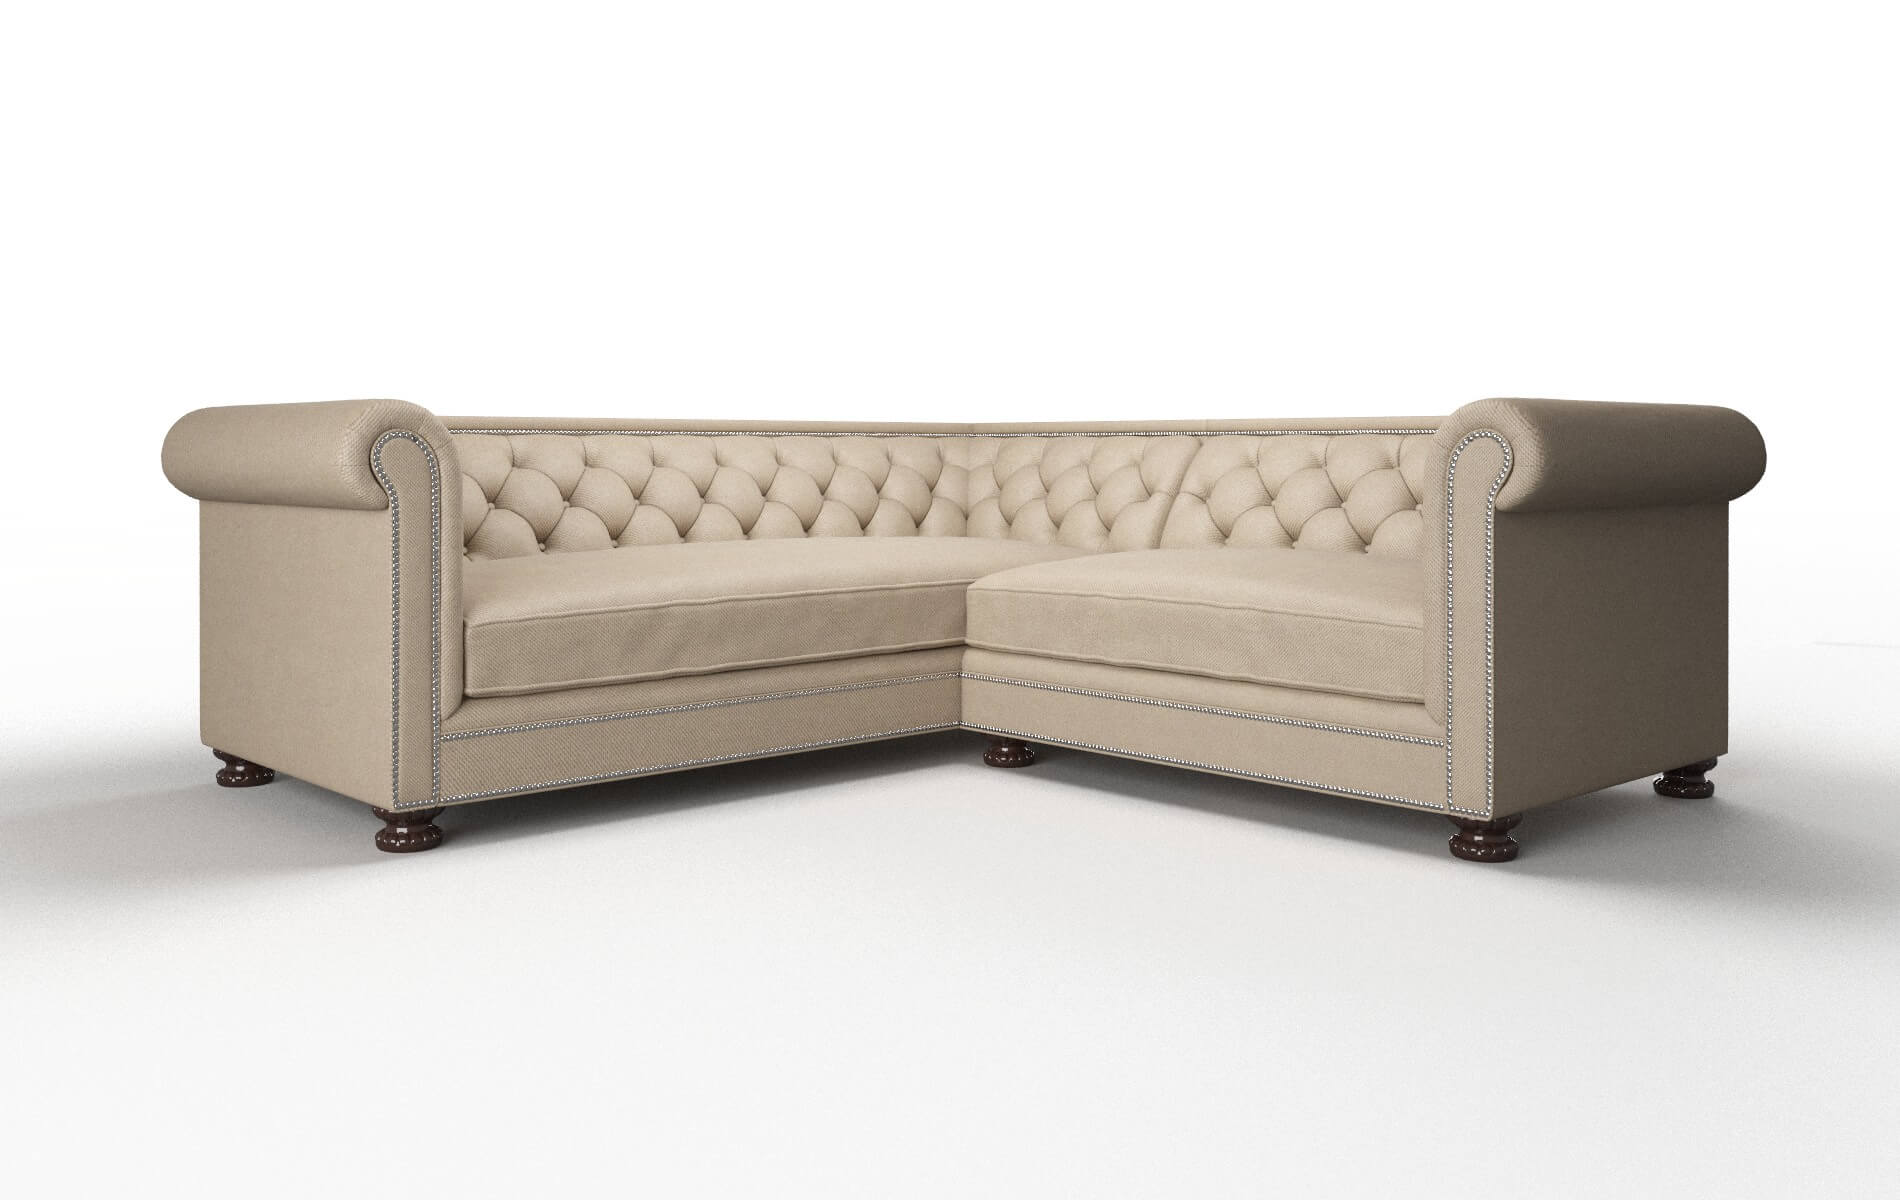 Athens Rocket Cappuccino Sectional espresso legs